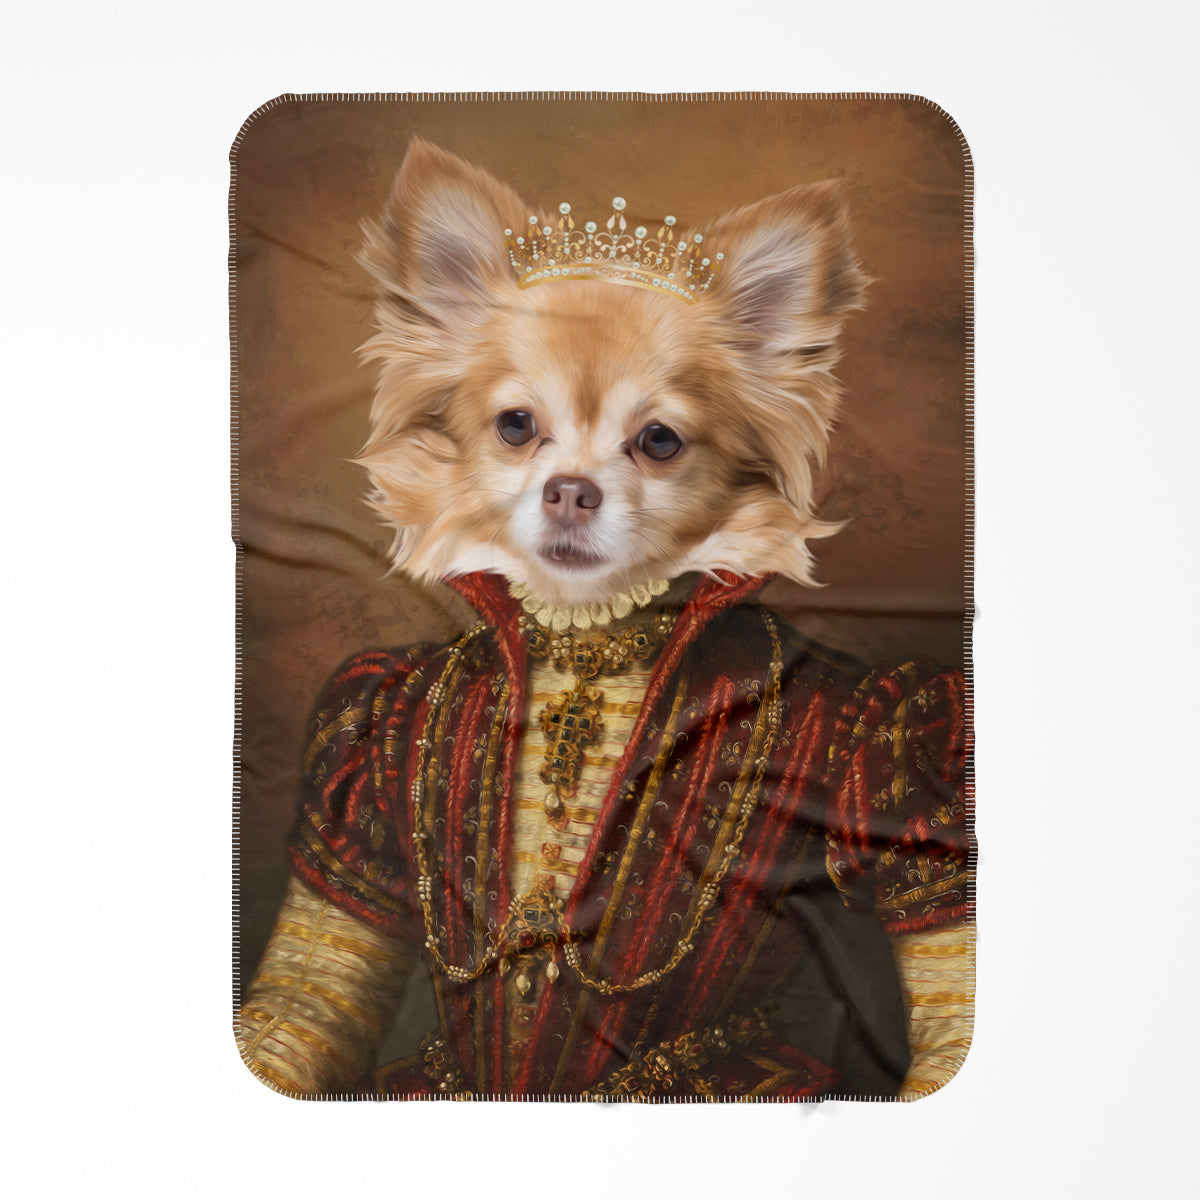 The Spanish Princess: Custom Pet Blanket - Paw & Glory - #pet portraits# - #dog portraits# - #pet portraits uk#Pawandglory, Pet art blanket,picture of your dog on a blanket, custom blankets with dog pictures, put your pets face on a blanket, dog face on blanket, blanket dog picture